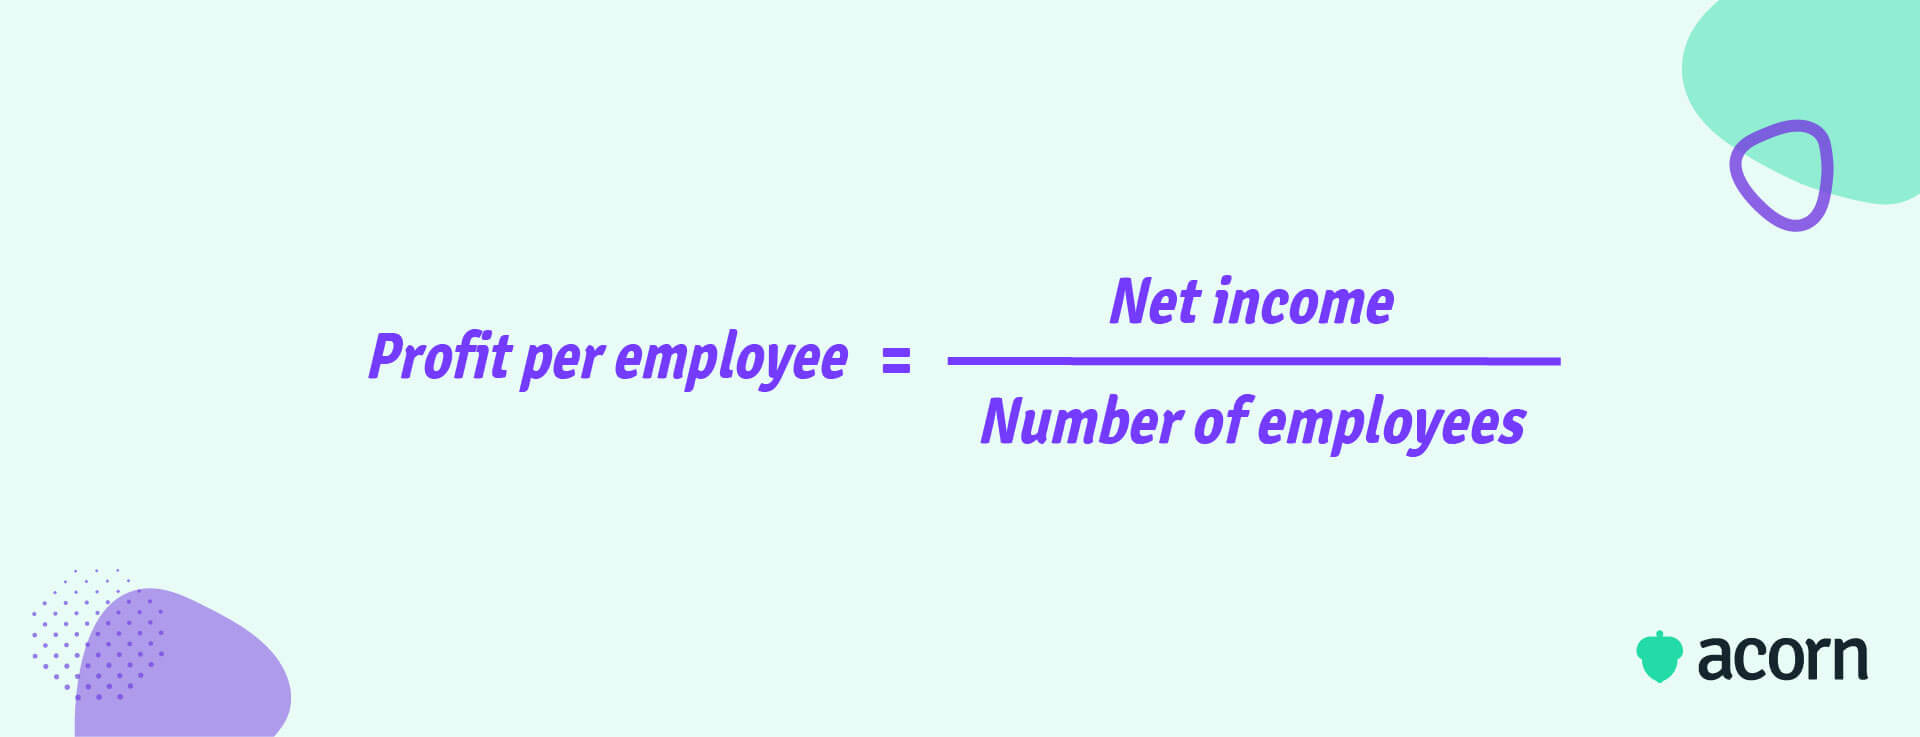 Profit per employee = Net income/Total number of employees